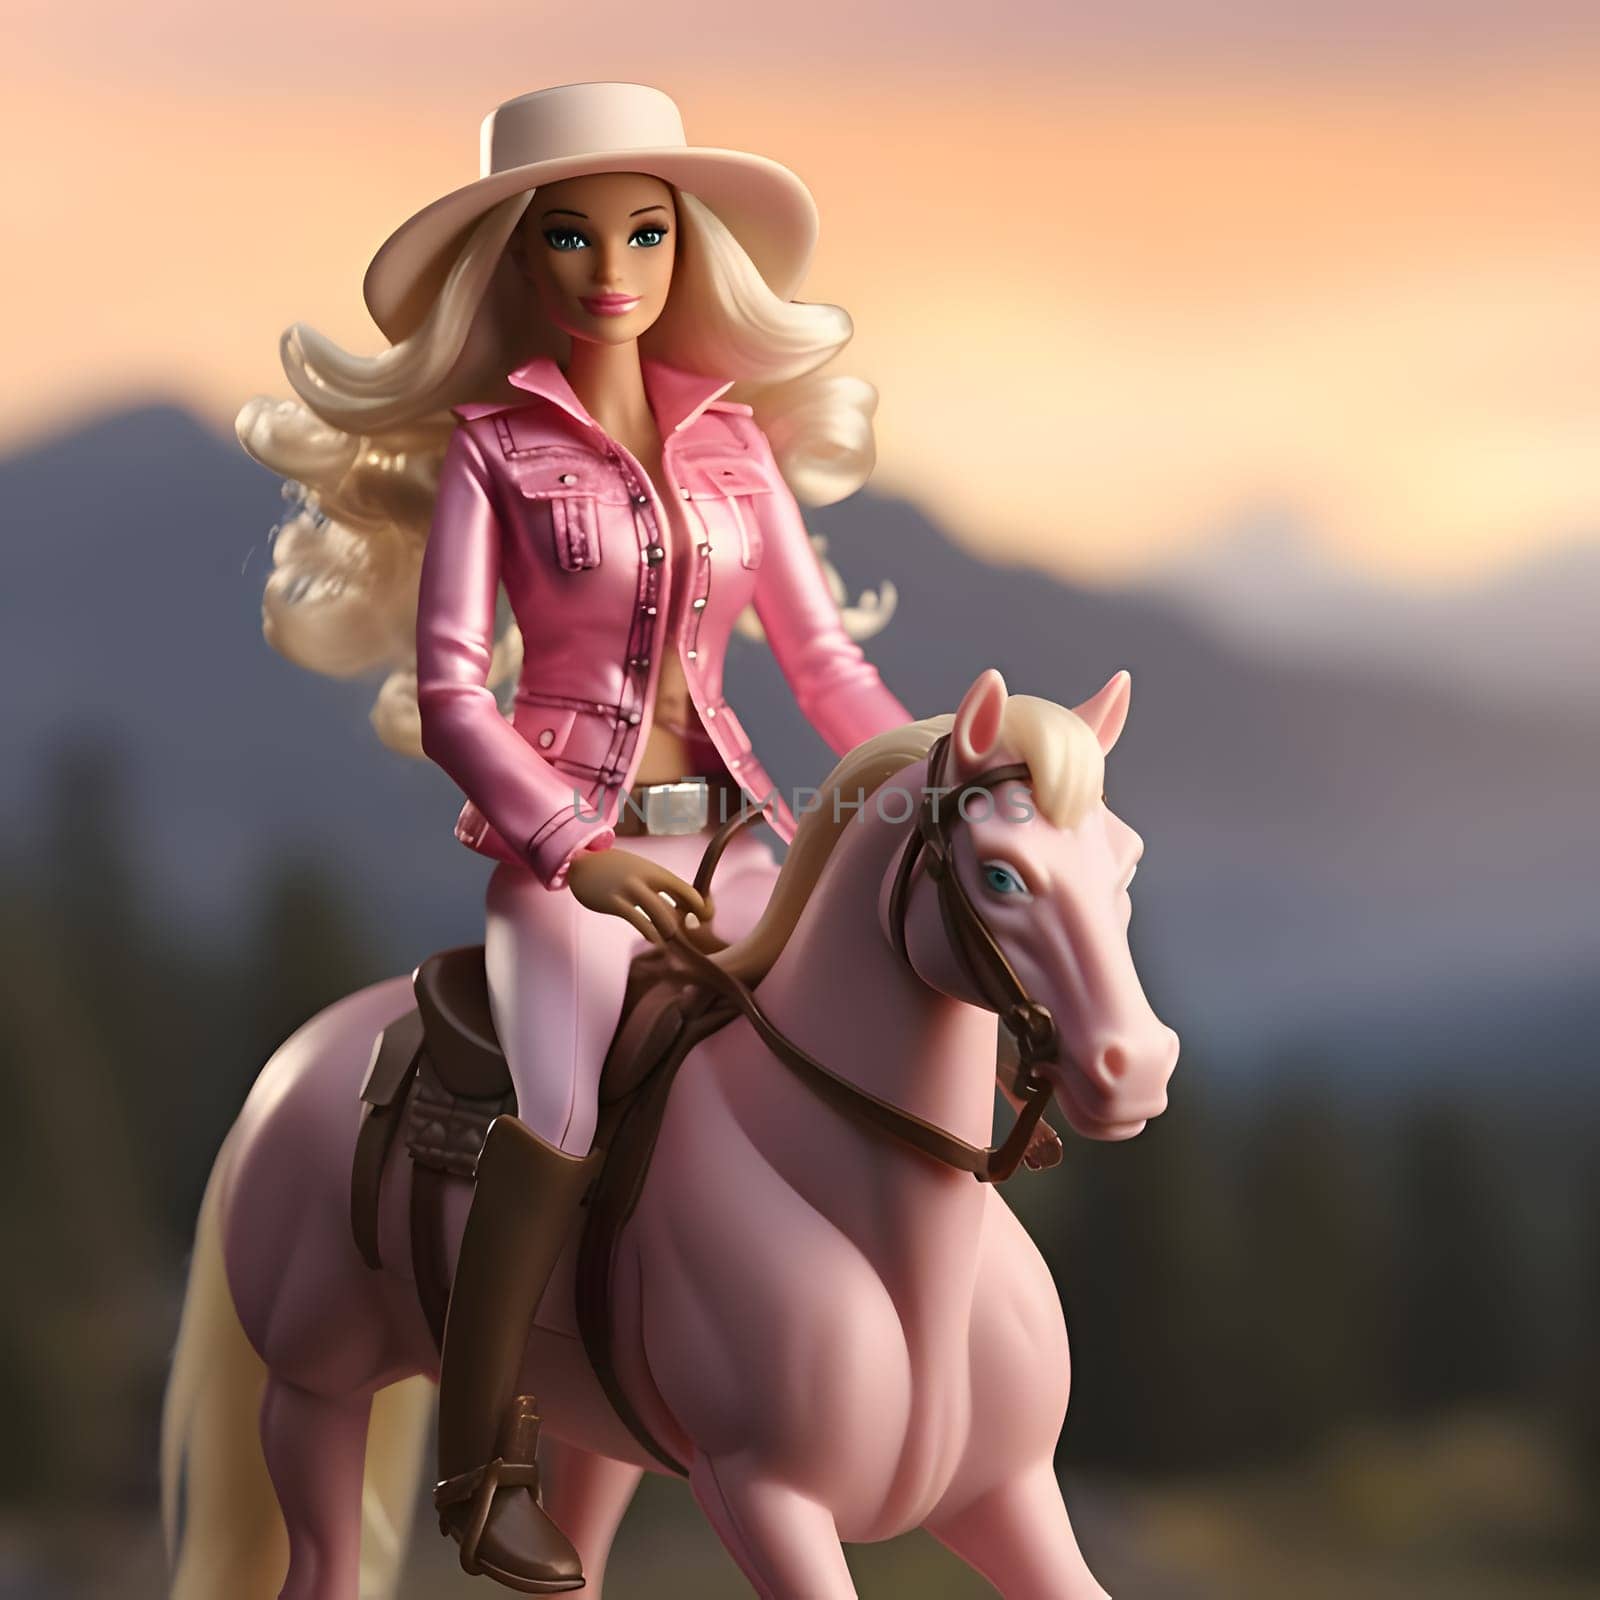 Cute blonde Barbie wearing pink outfit and white hat, sits on a white horse, against blurred mountains background. by ThemesS